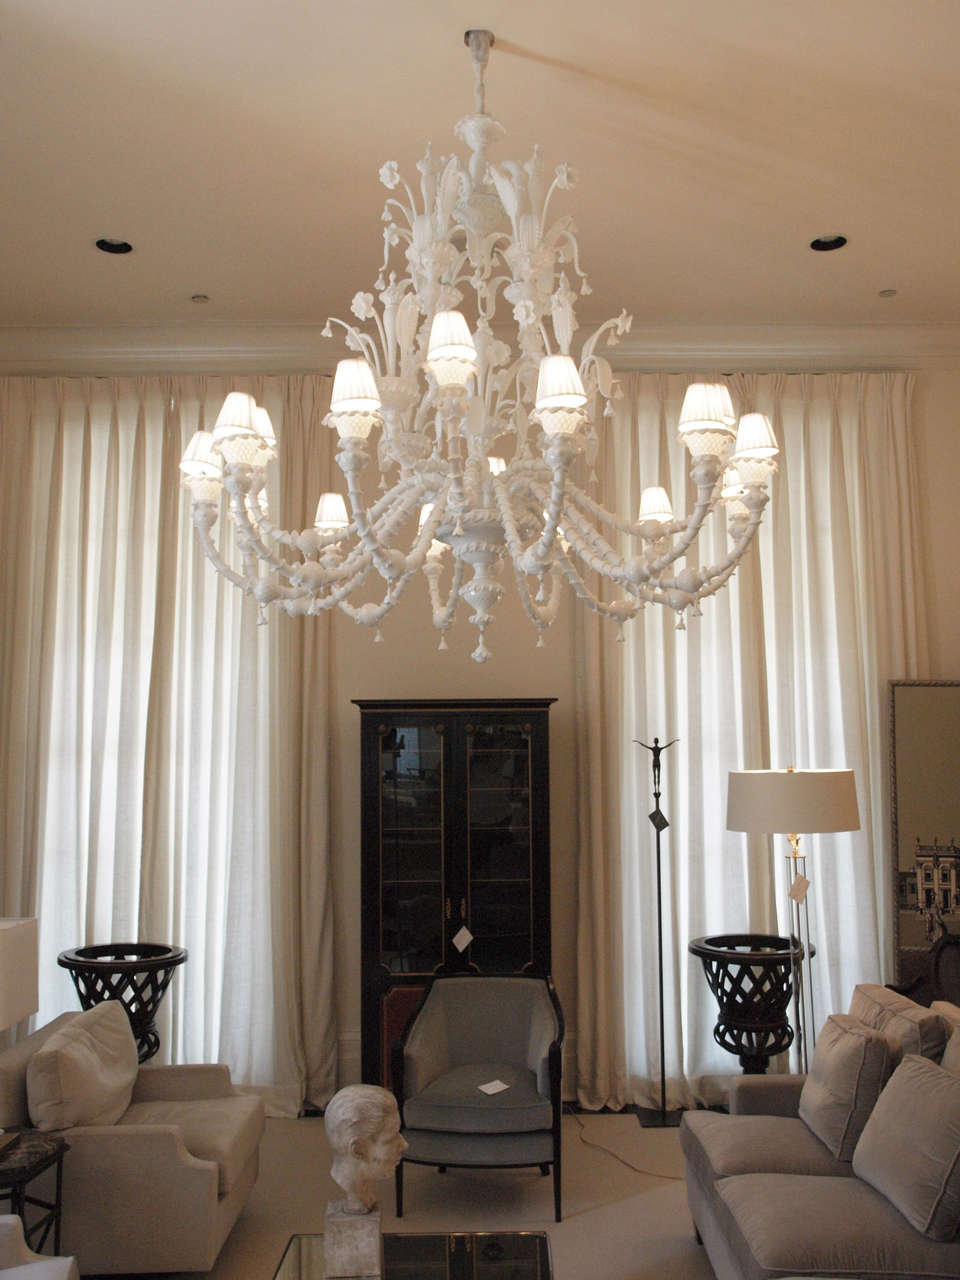 Spectacular and grand 16-light chandelier in milk-glass of highly unusual form with four large c-chaped stems replacing the more typical central stem;  heavily decorated throughout with blown glass leaves, daffodils, and bell-flowers, the arms